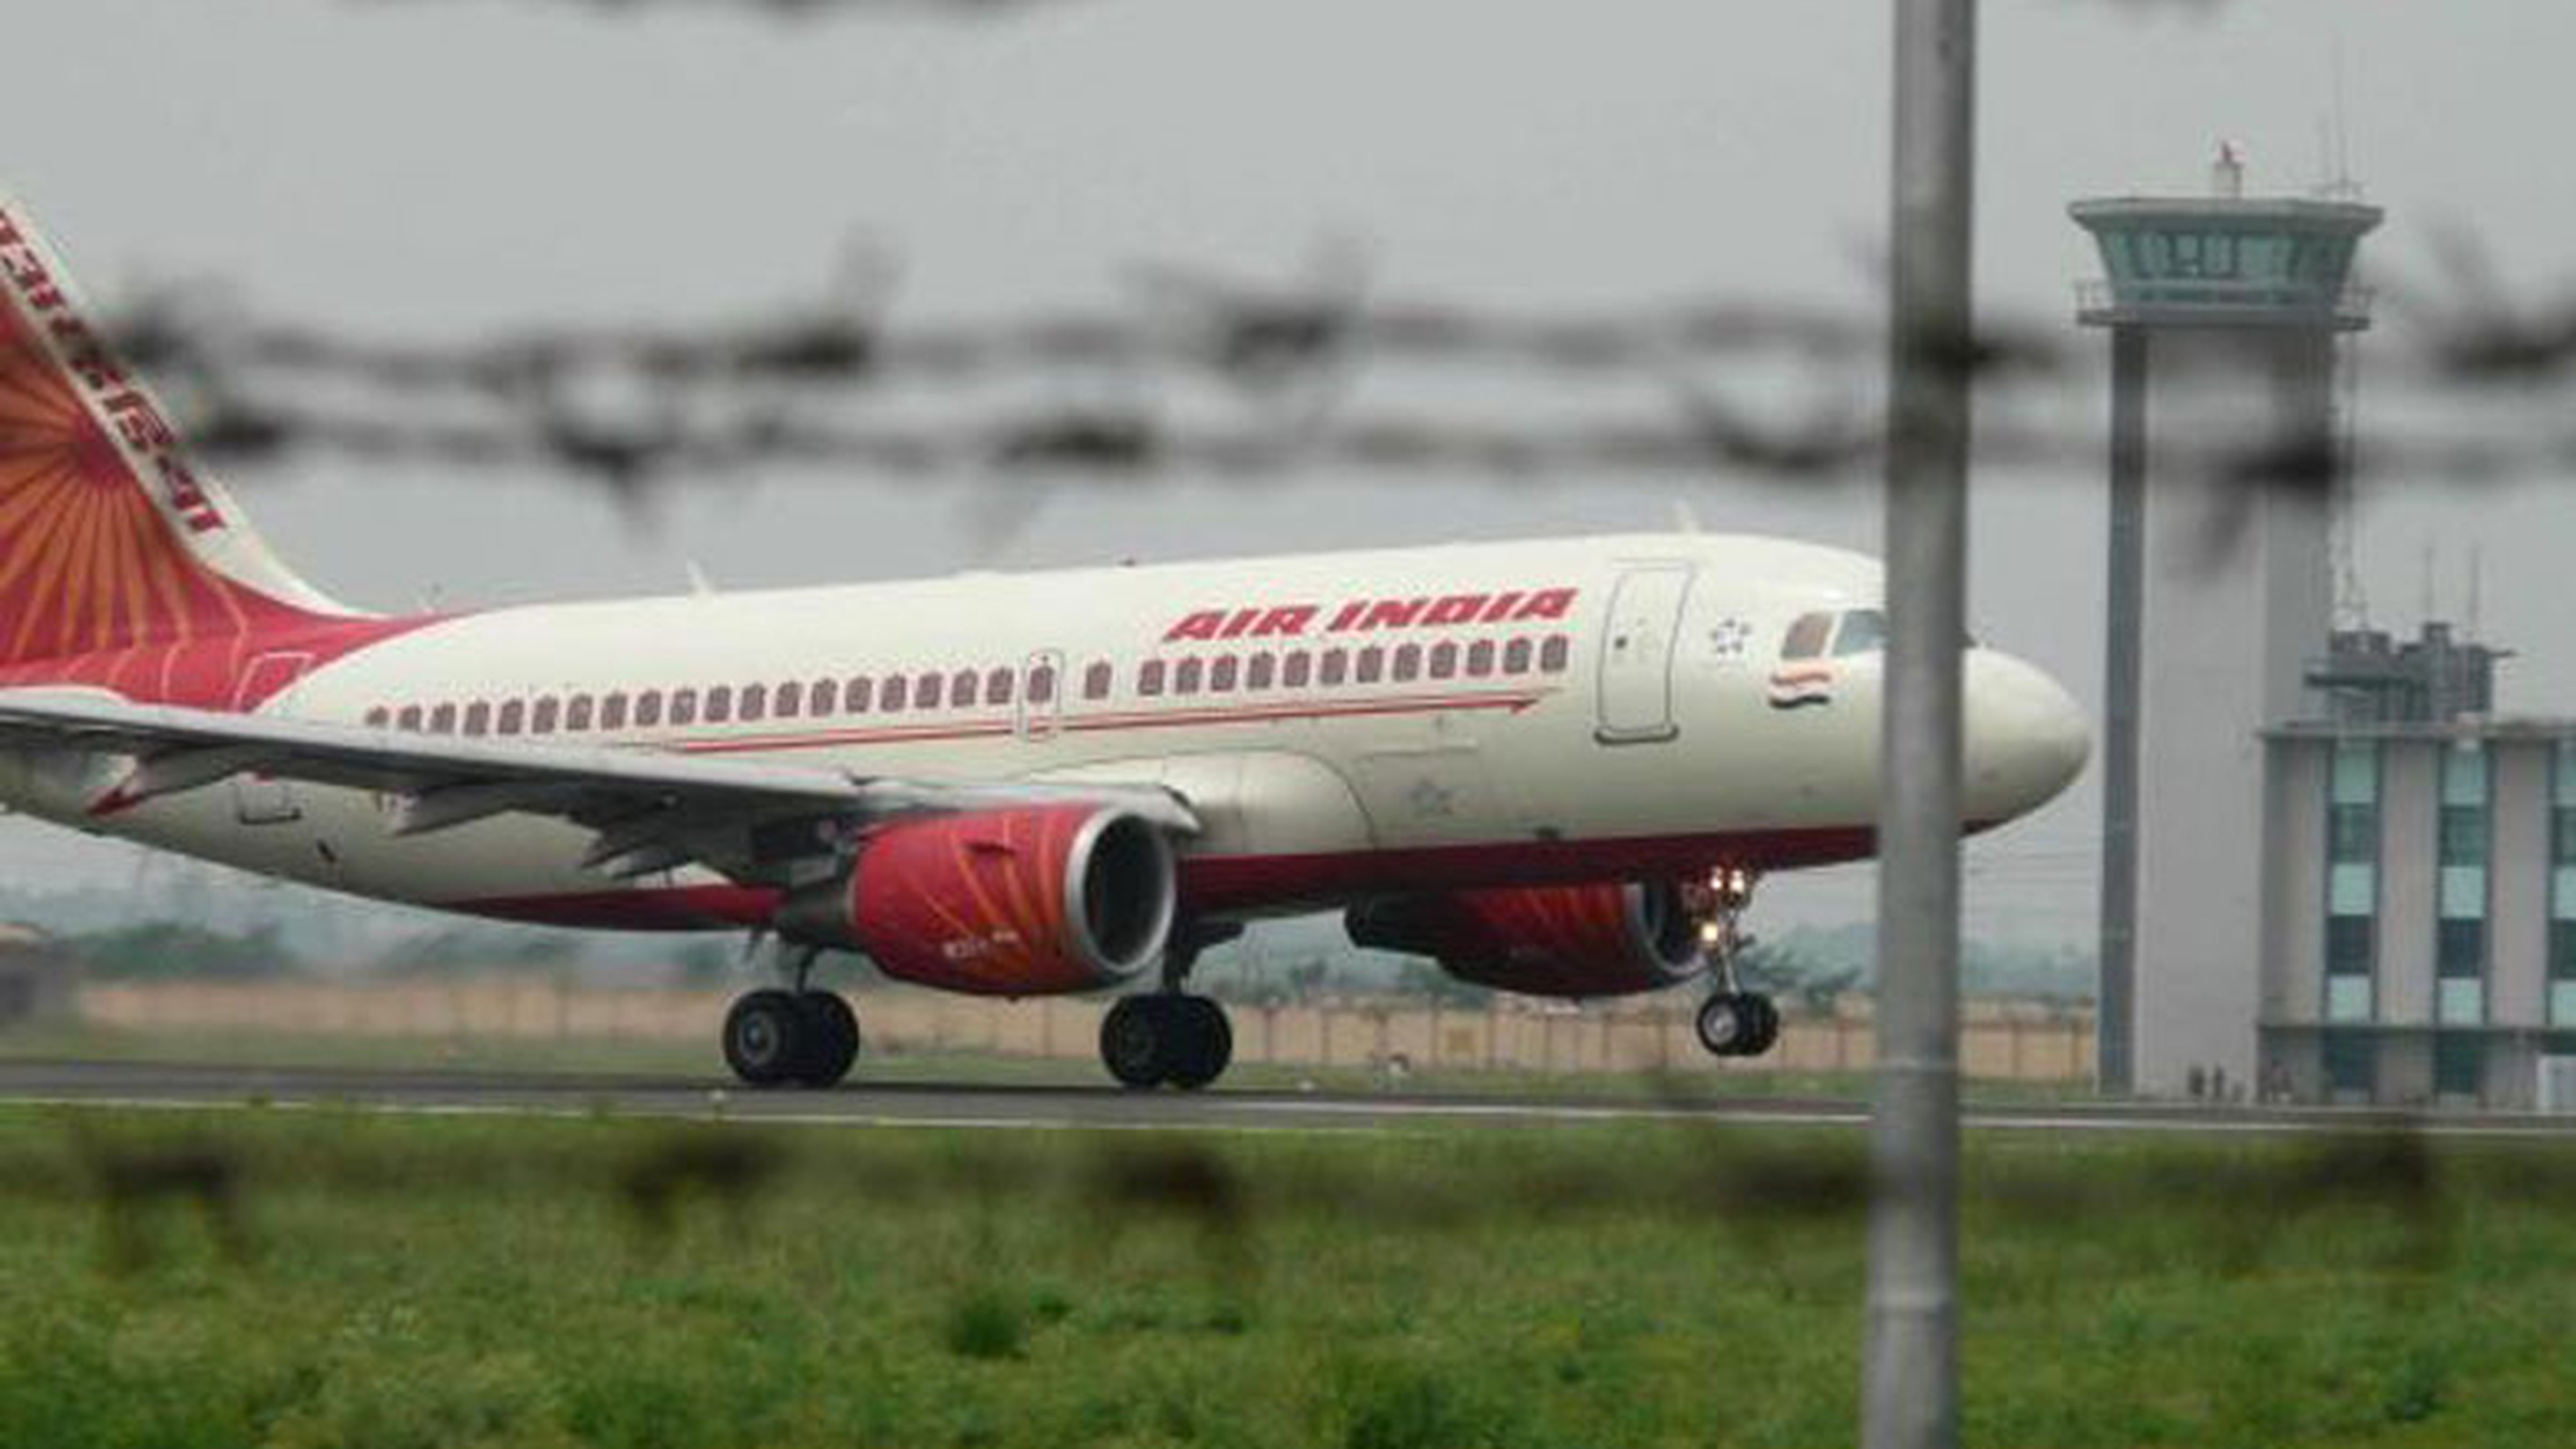 Air India has decided to “roll back” its boarding passes bearing photographs of Prime Minister Narendra Modi and Gujarat Chief Minister Vijay Rupani after they came in for criticism.